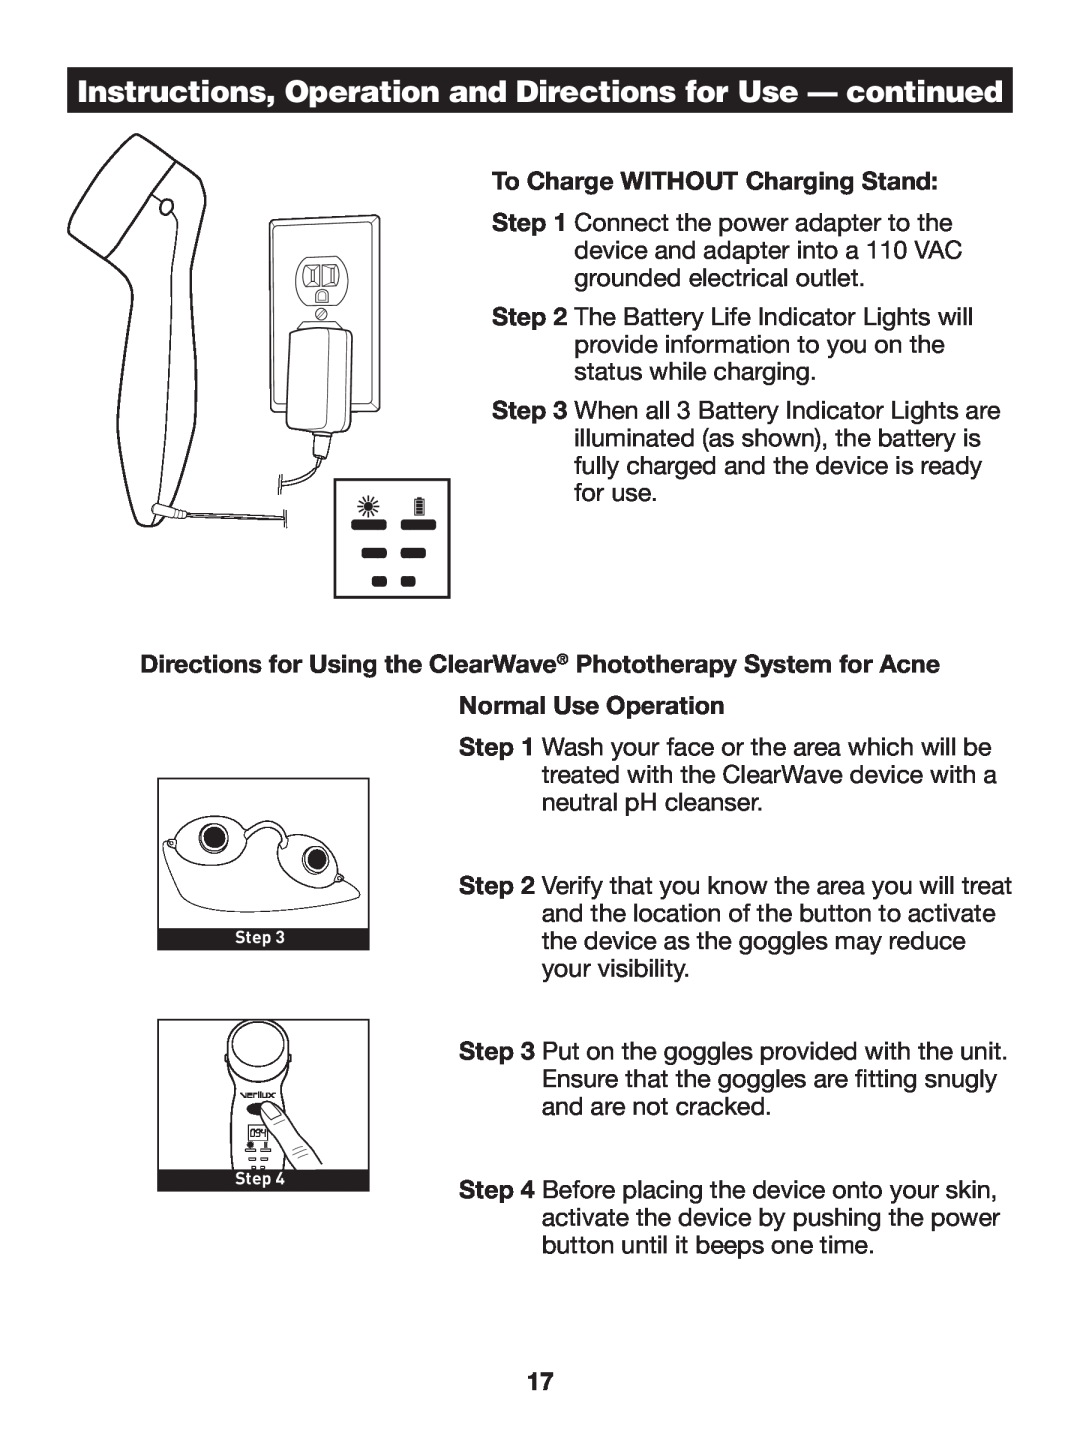 Verilux CW01 manual Instructions, Operation and Directions for Use - continued, To Charge WITHOUT Charging Stand 